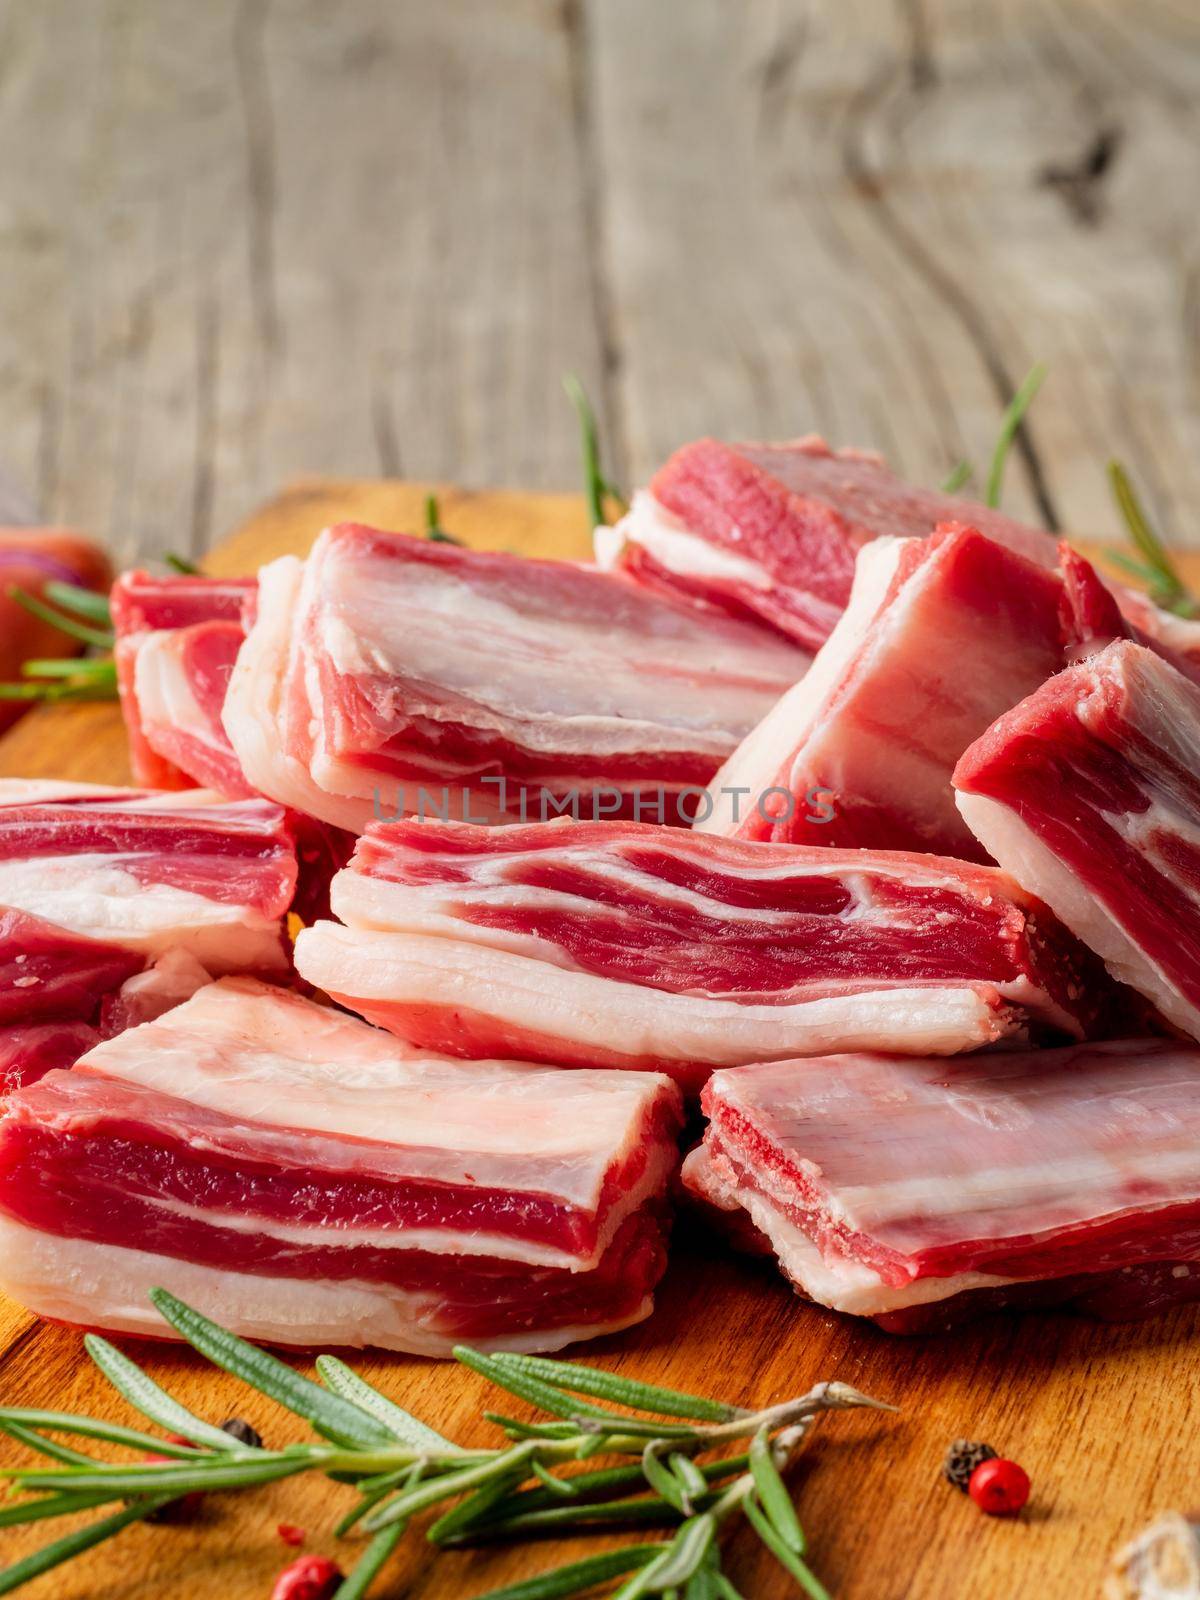 Small pieces of raw lamb ribs on wooden chopping Board on old rustic wooden background, side view, vertical